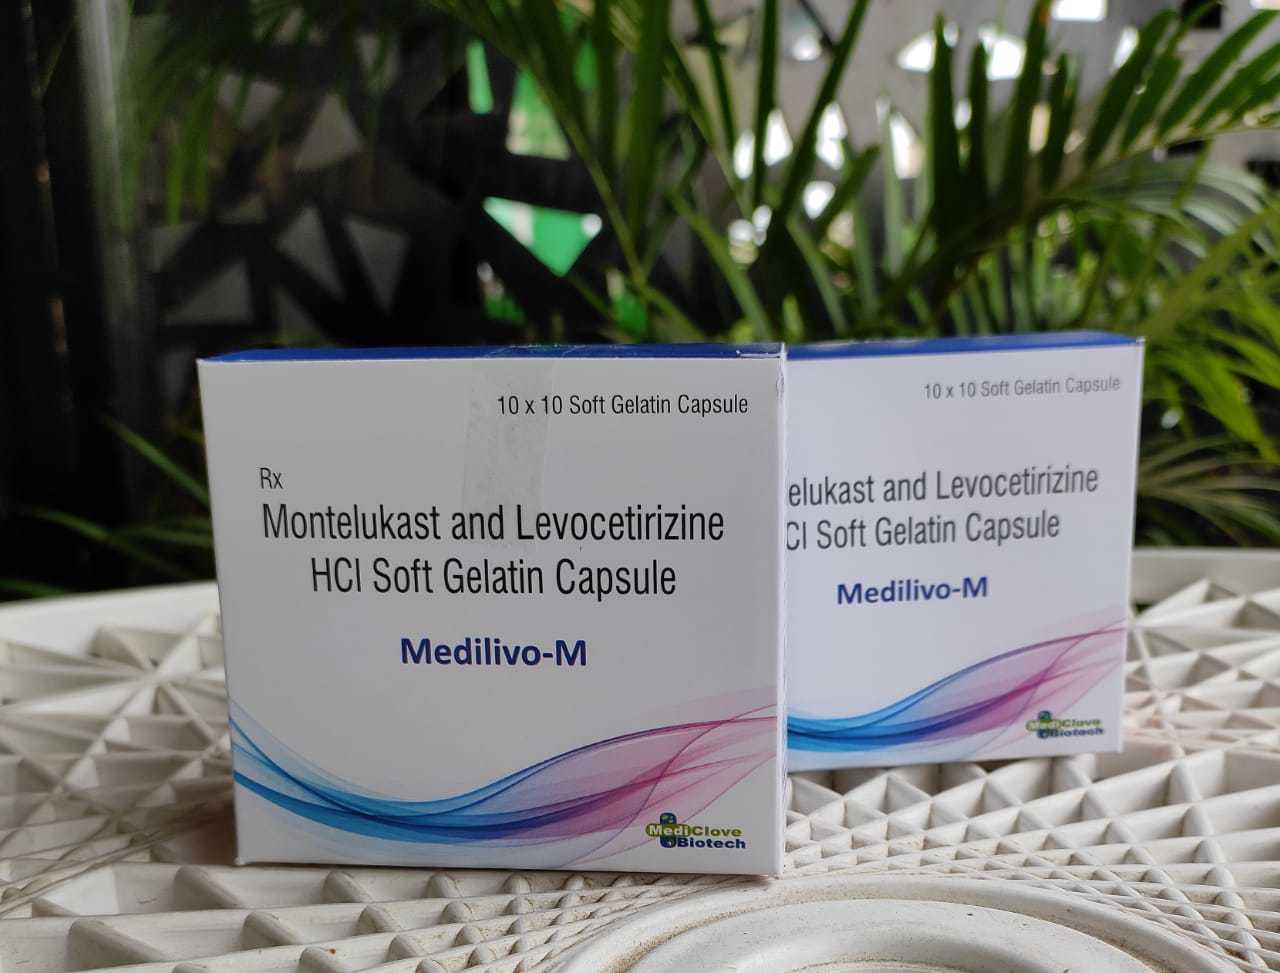 Montelukast And Levocetirizine Tablets At Latest Price In Panchkula Manufacturer Supplier Haryana